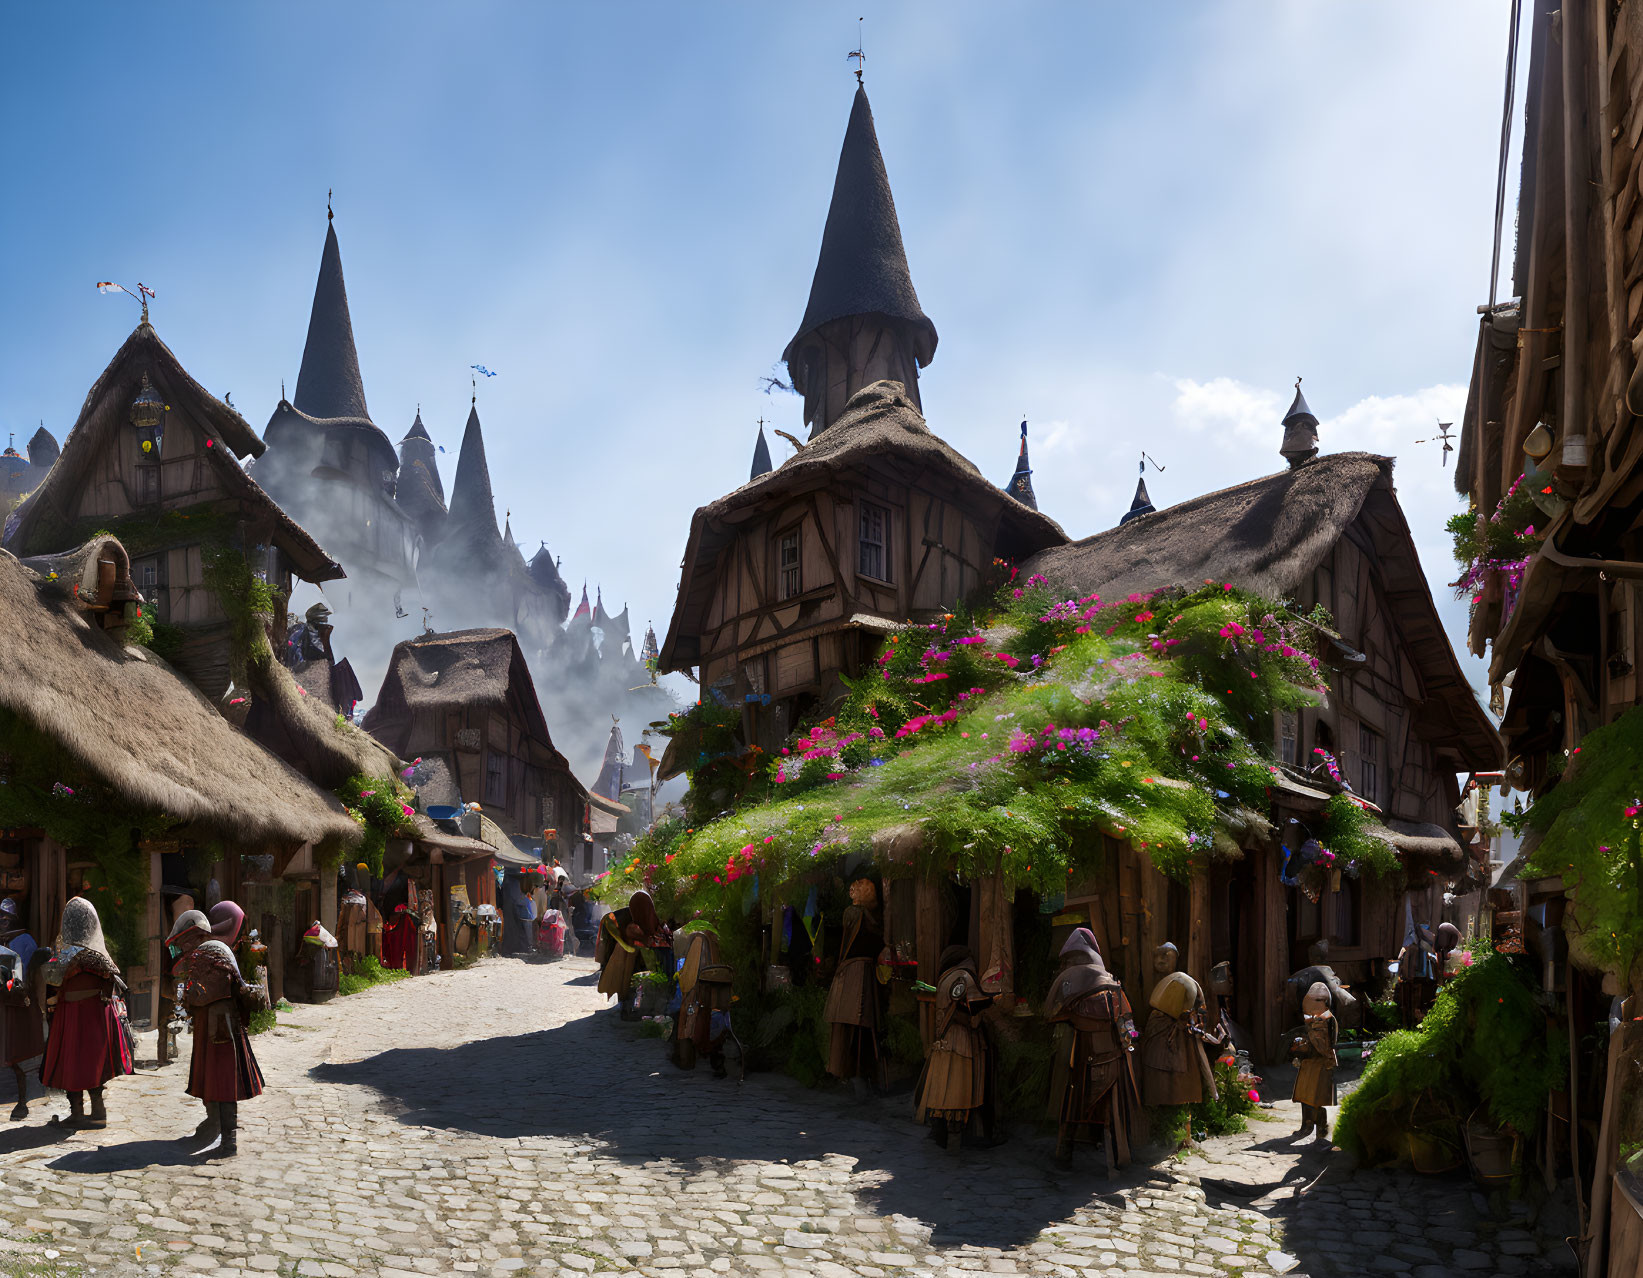 Medieval village with people in the streets